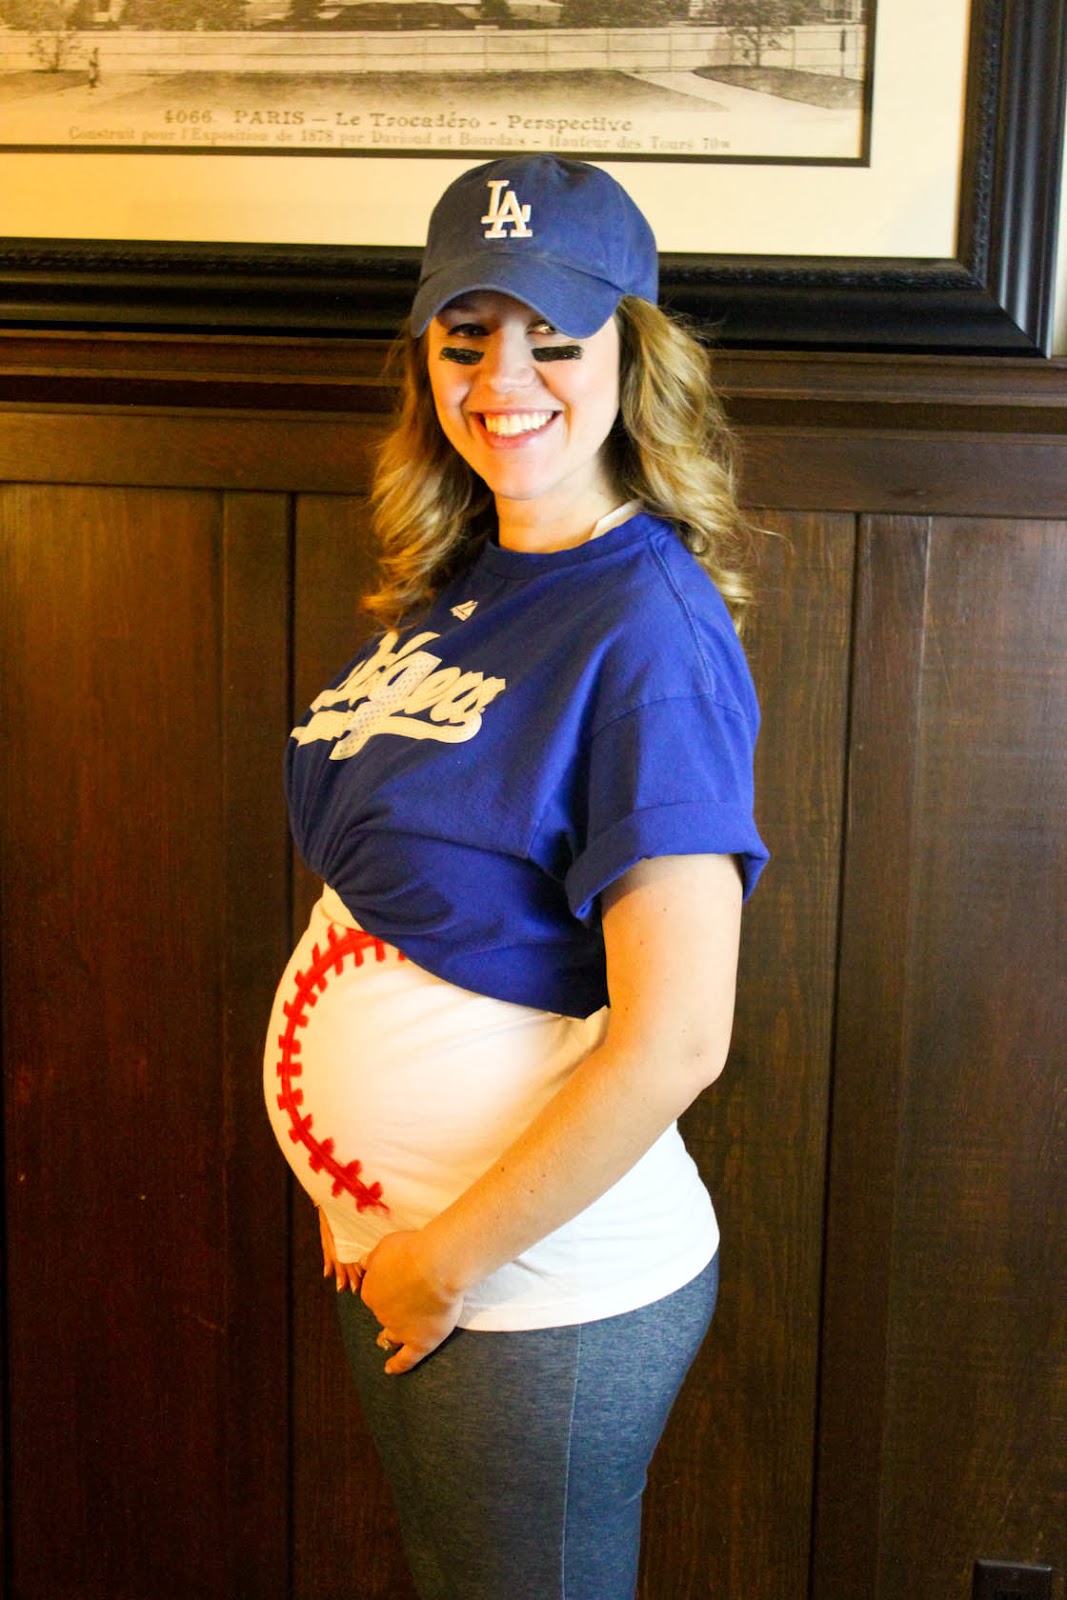 From Dahlias to Doxies: DIY Pregnant Baseball and Umpire Costumes